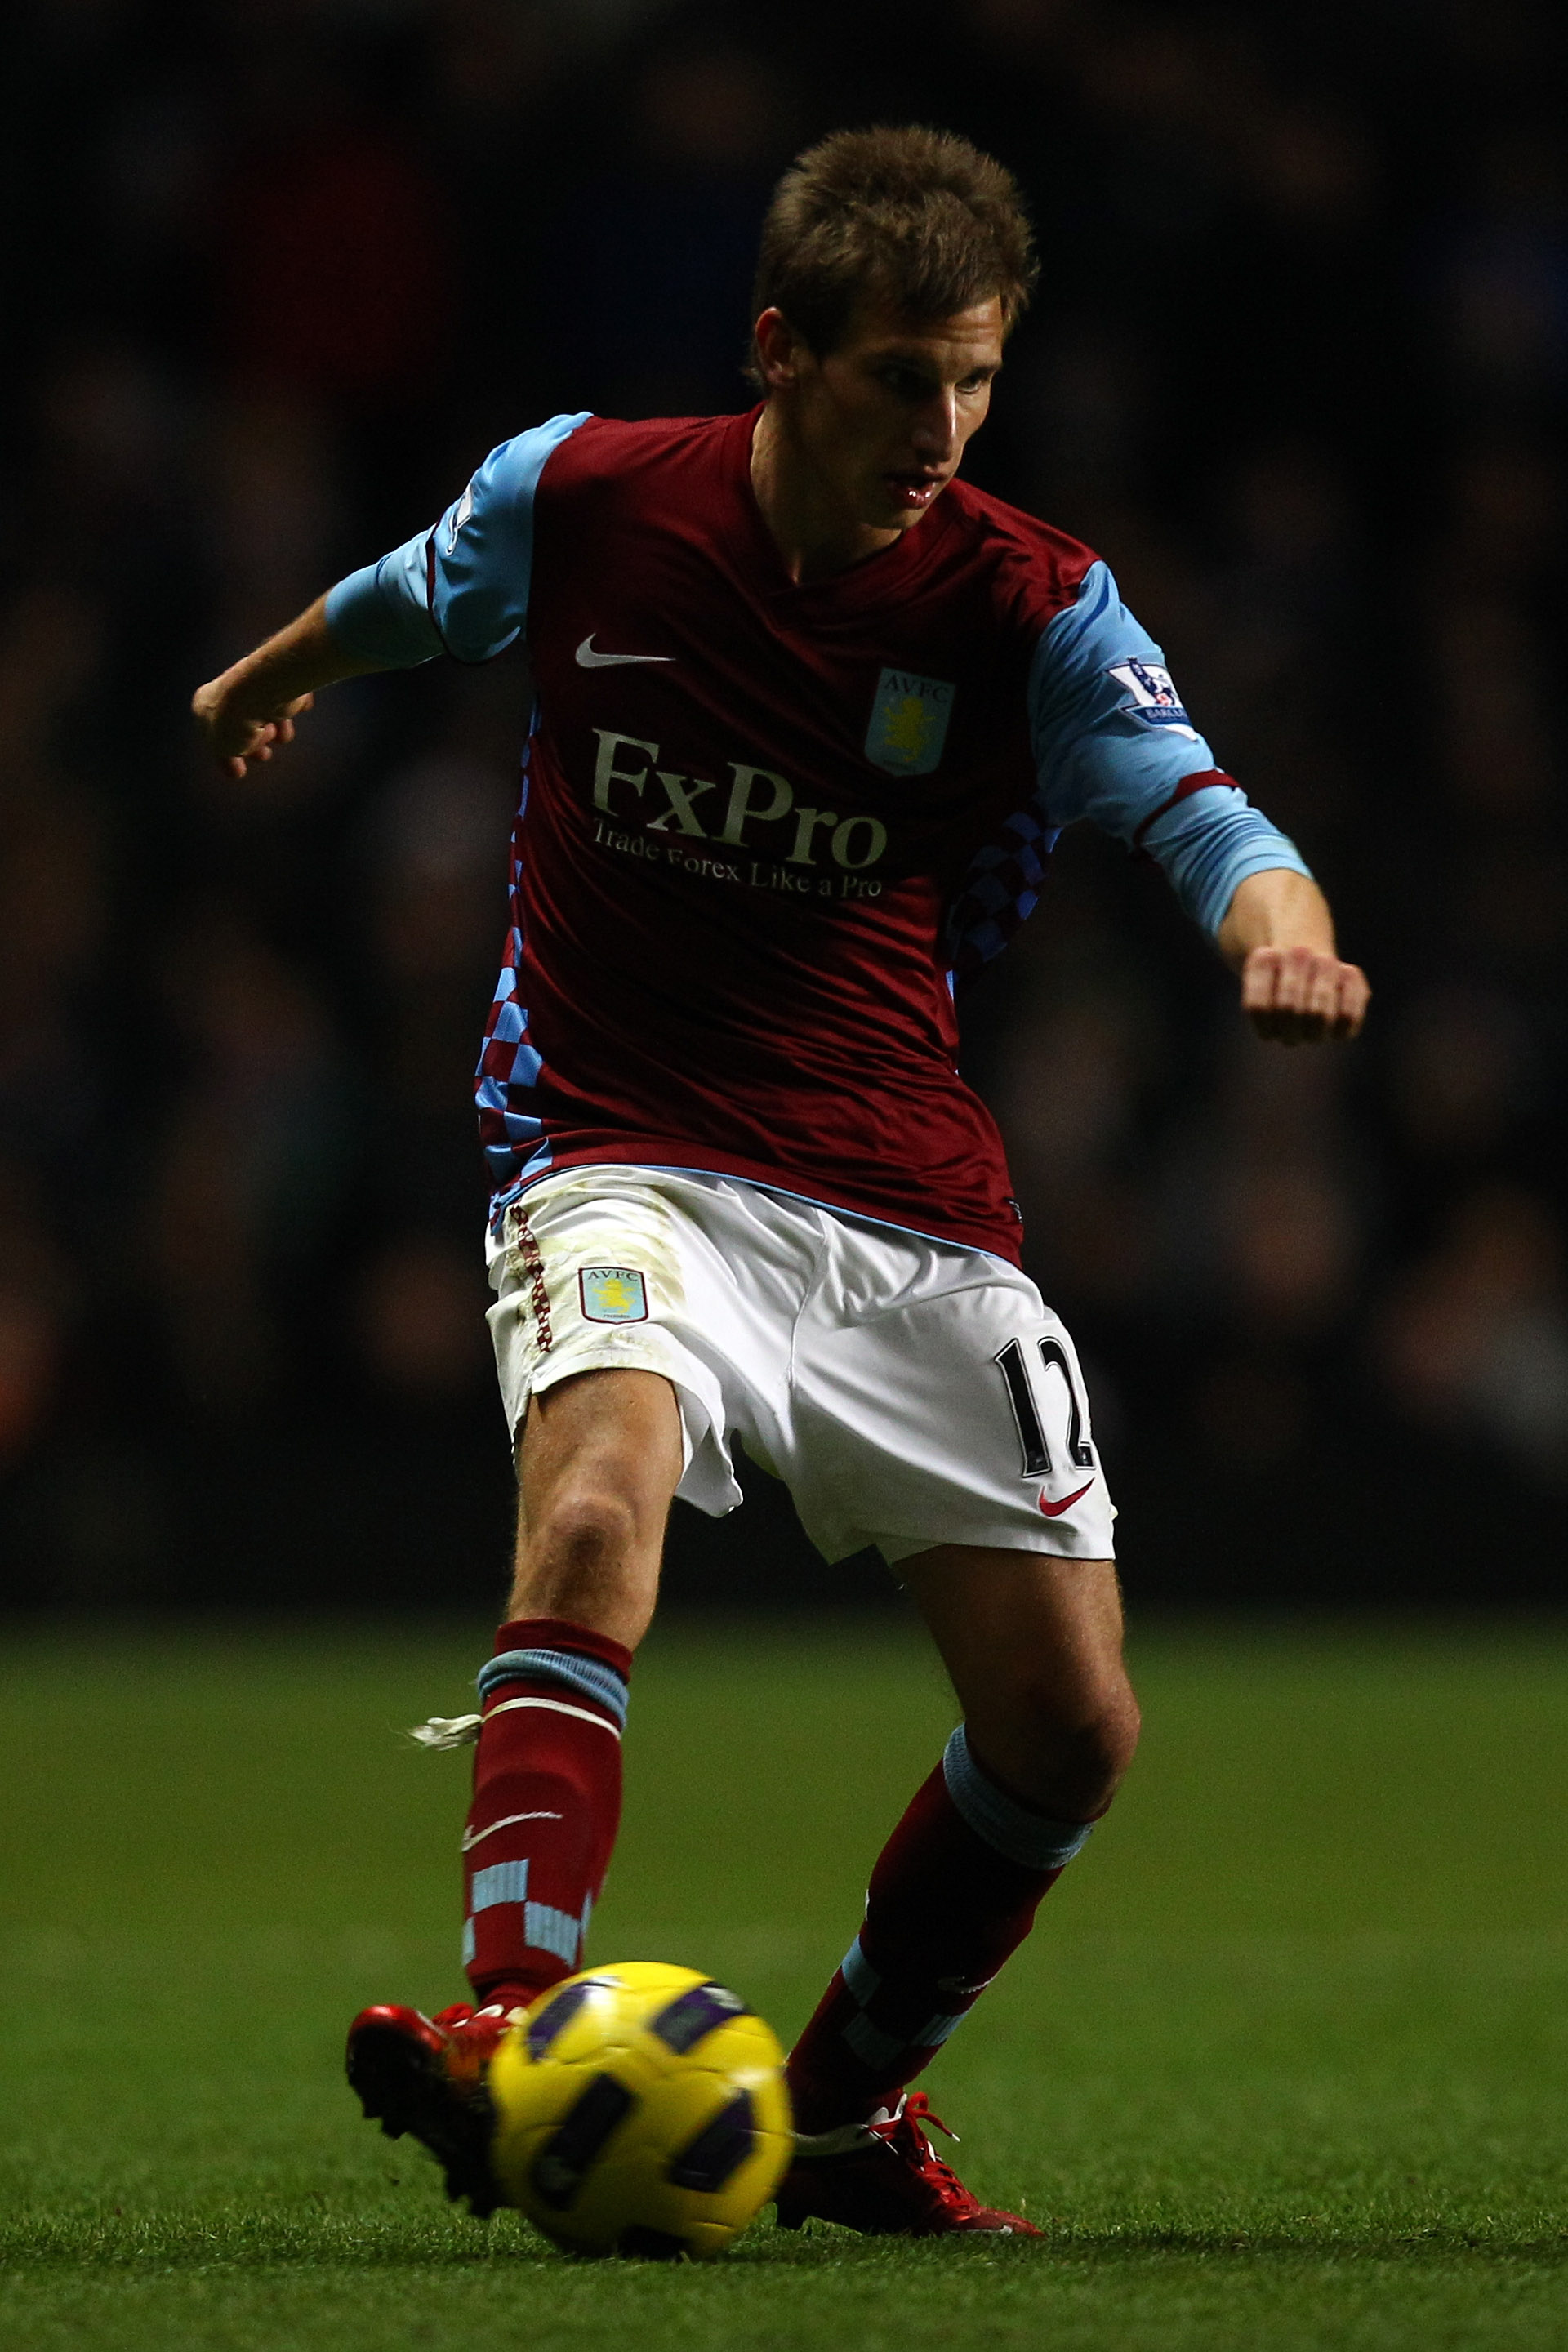 BIRMINGHAM, ENGLAND - DECEMBER 11:  Mark Albrighton of Villa in action during the Barclays Premier League match between Aston Villa and West Bromwich Albion at Villa Park on December 11, 2010 in Birmingham, England.  (Photo by Richard Heathcote/Getty Imag